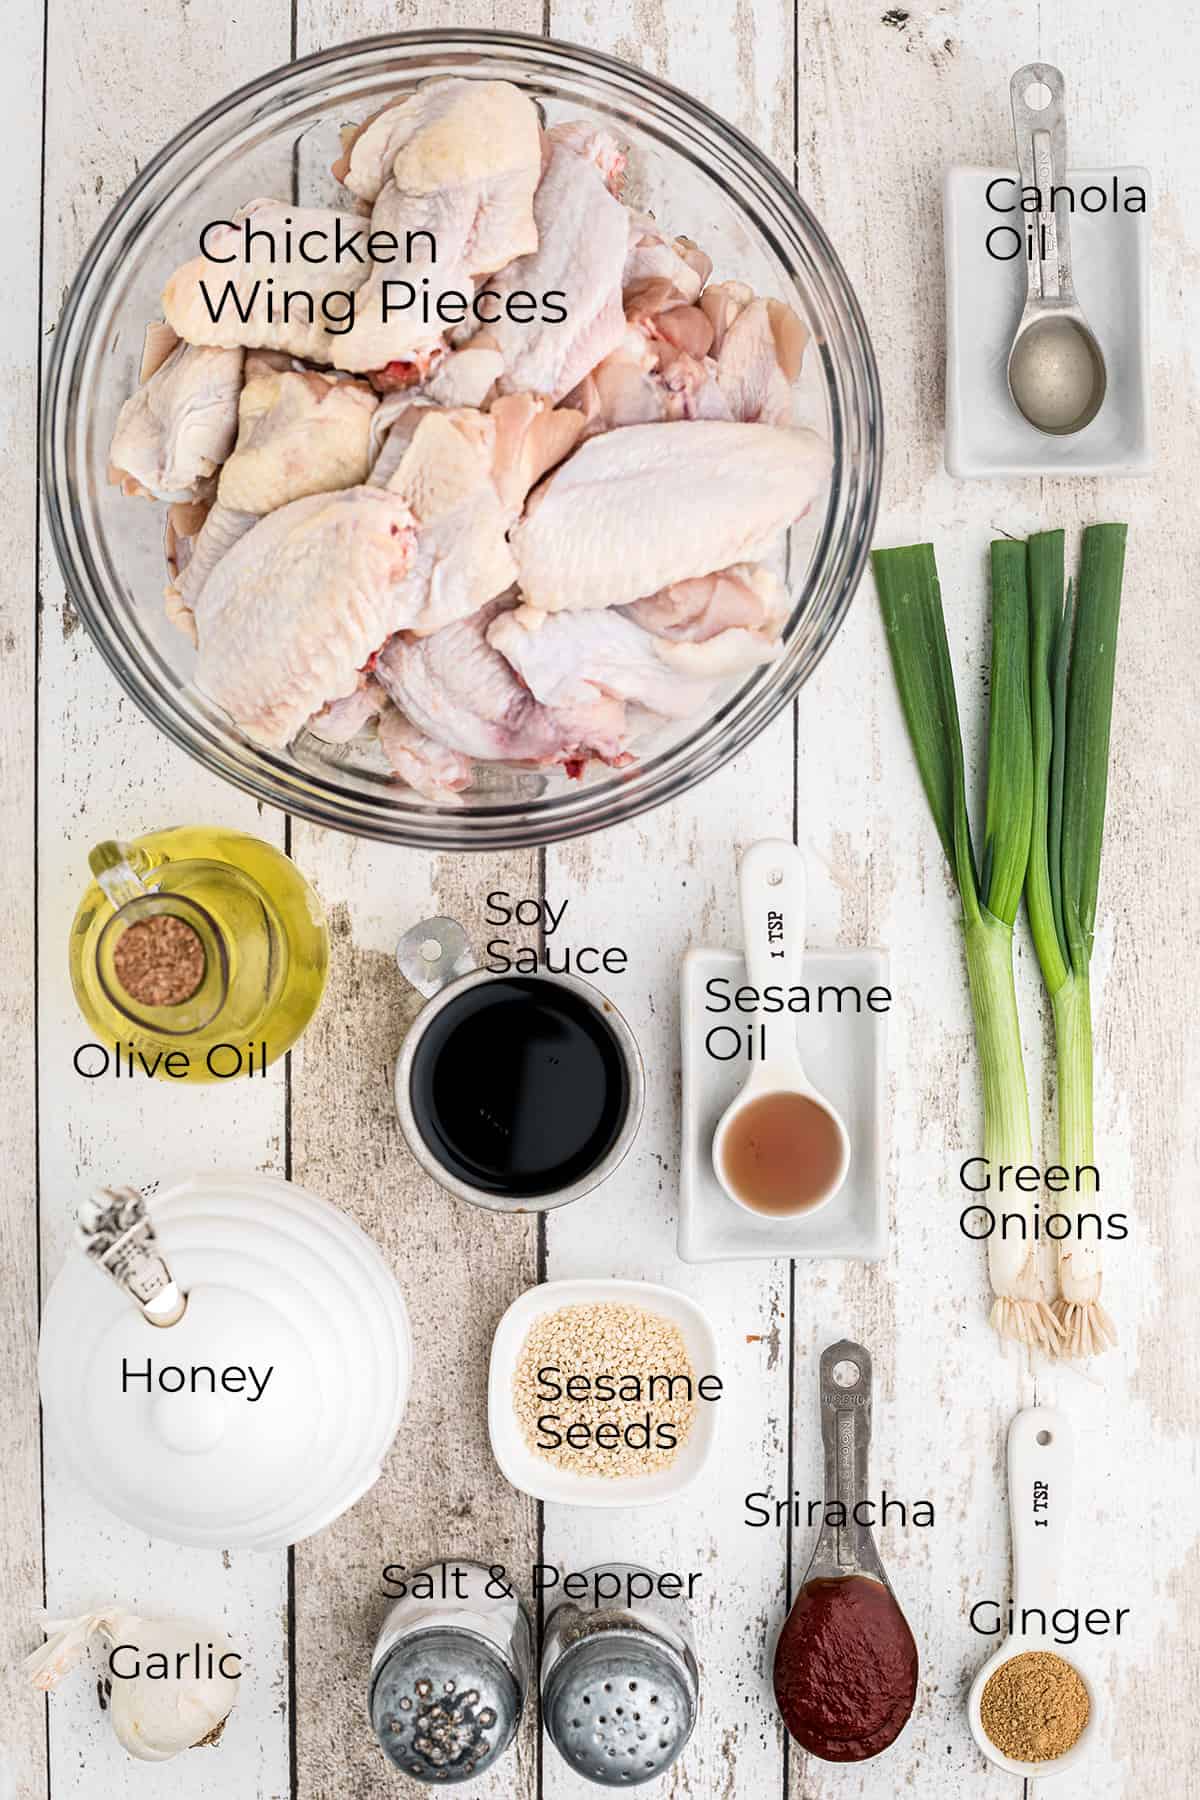 All ingredients needed to make sticky wings.